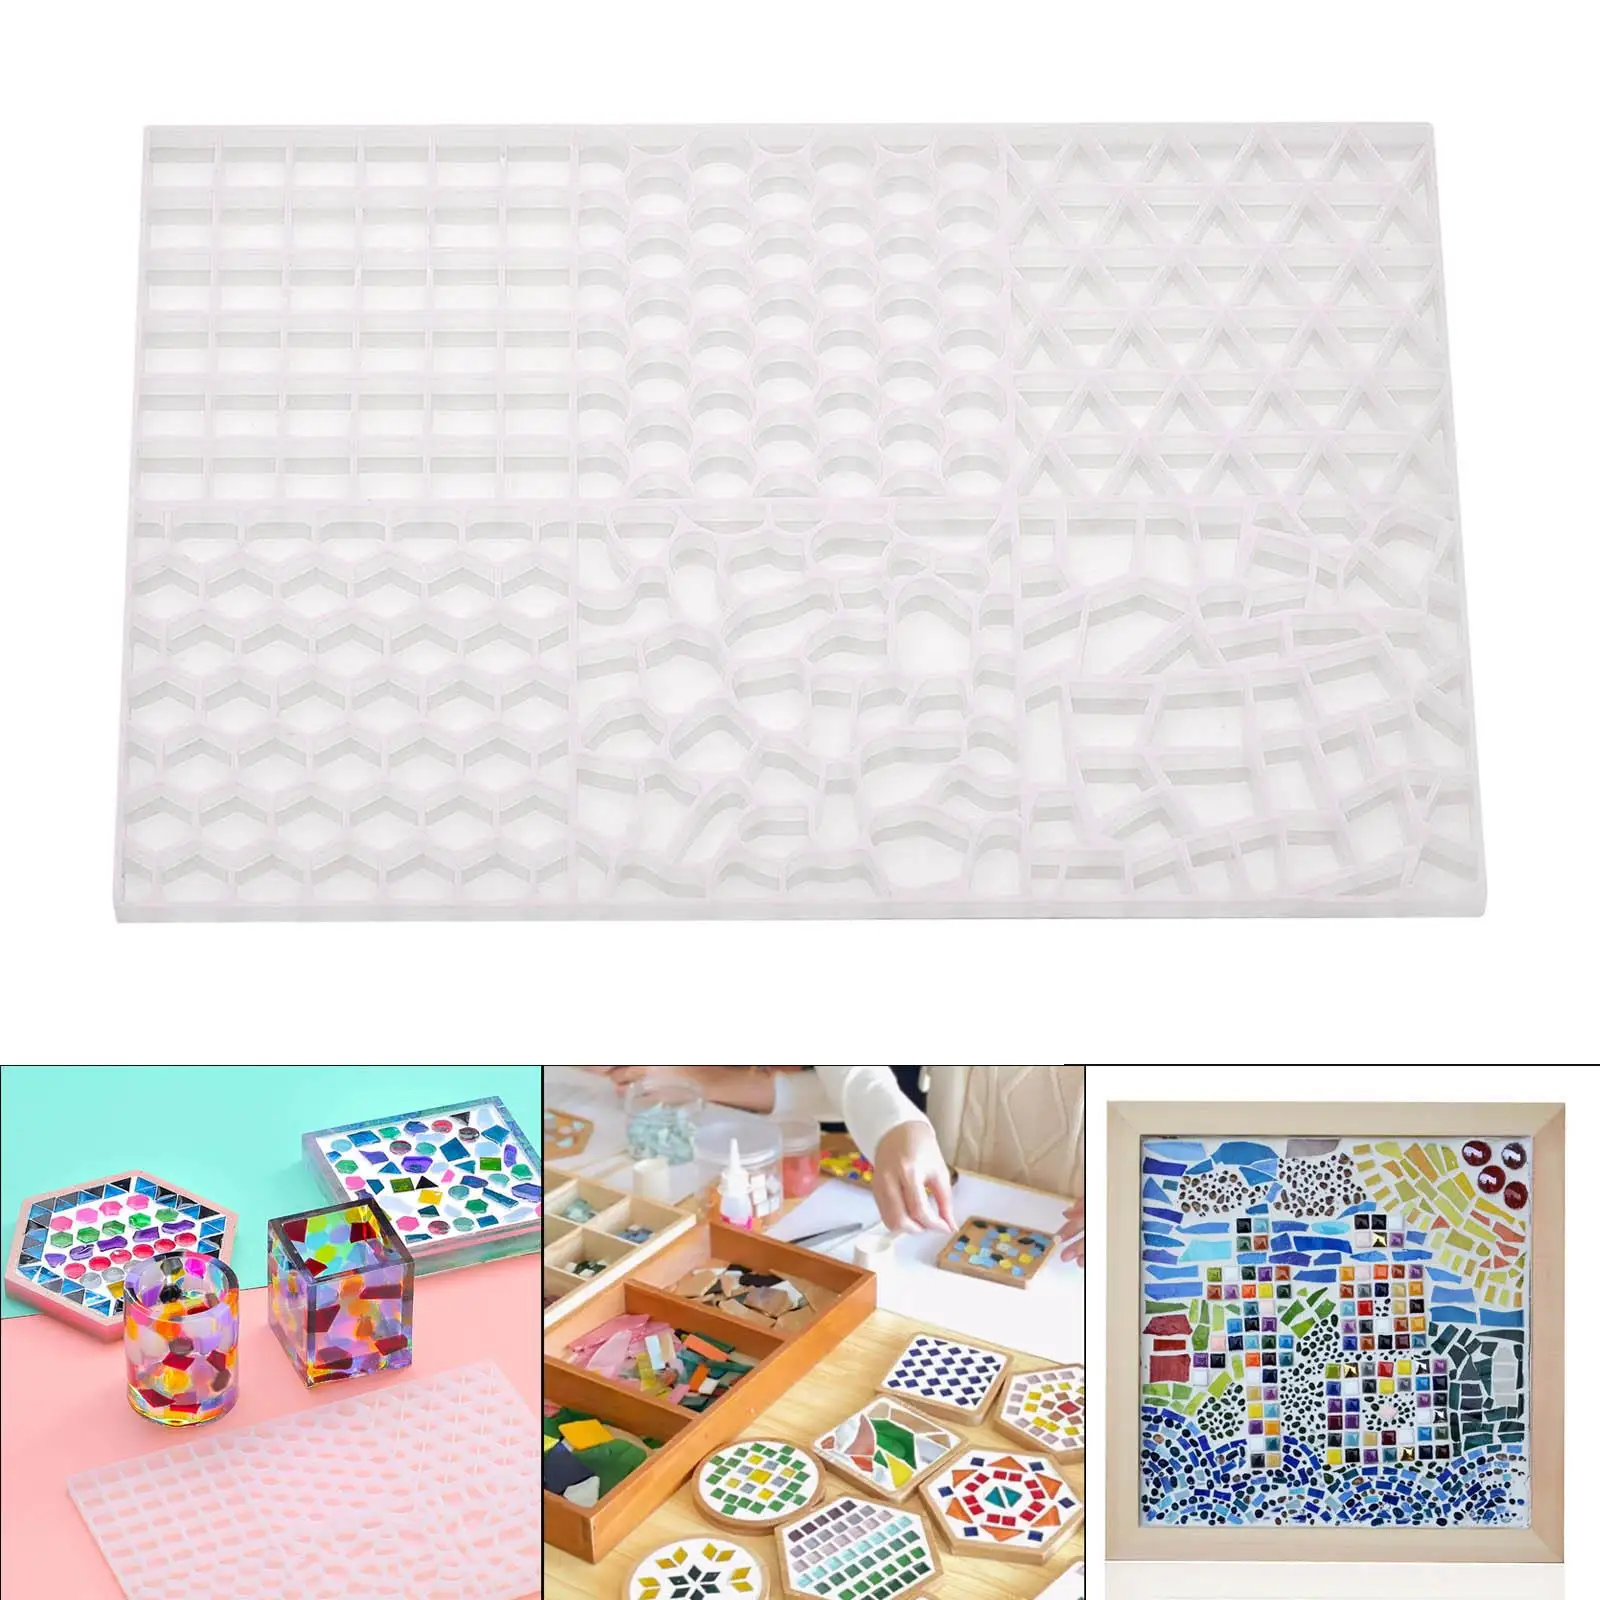 Irregular Mosaic Mold, Particle Silicone Jewelry Making, Craft Crafts Handmade Tool Art for DIY Coasters Wax Candle Epoxy